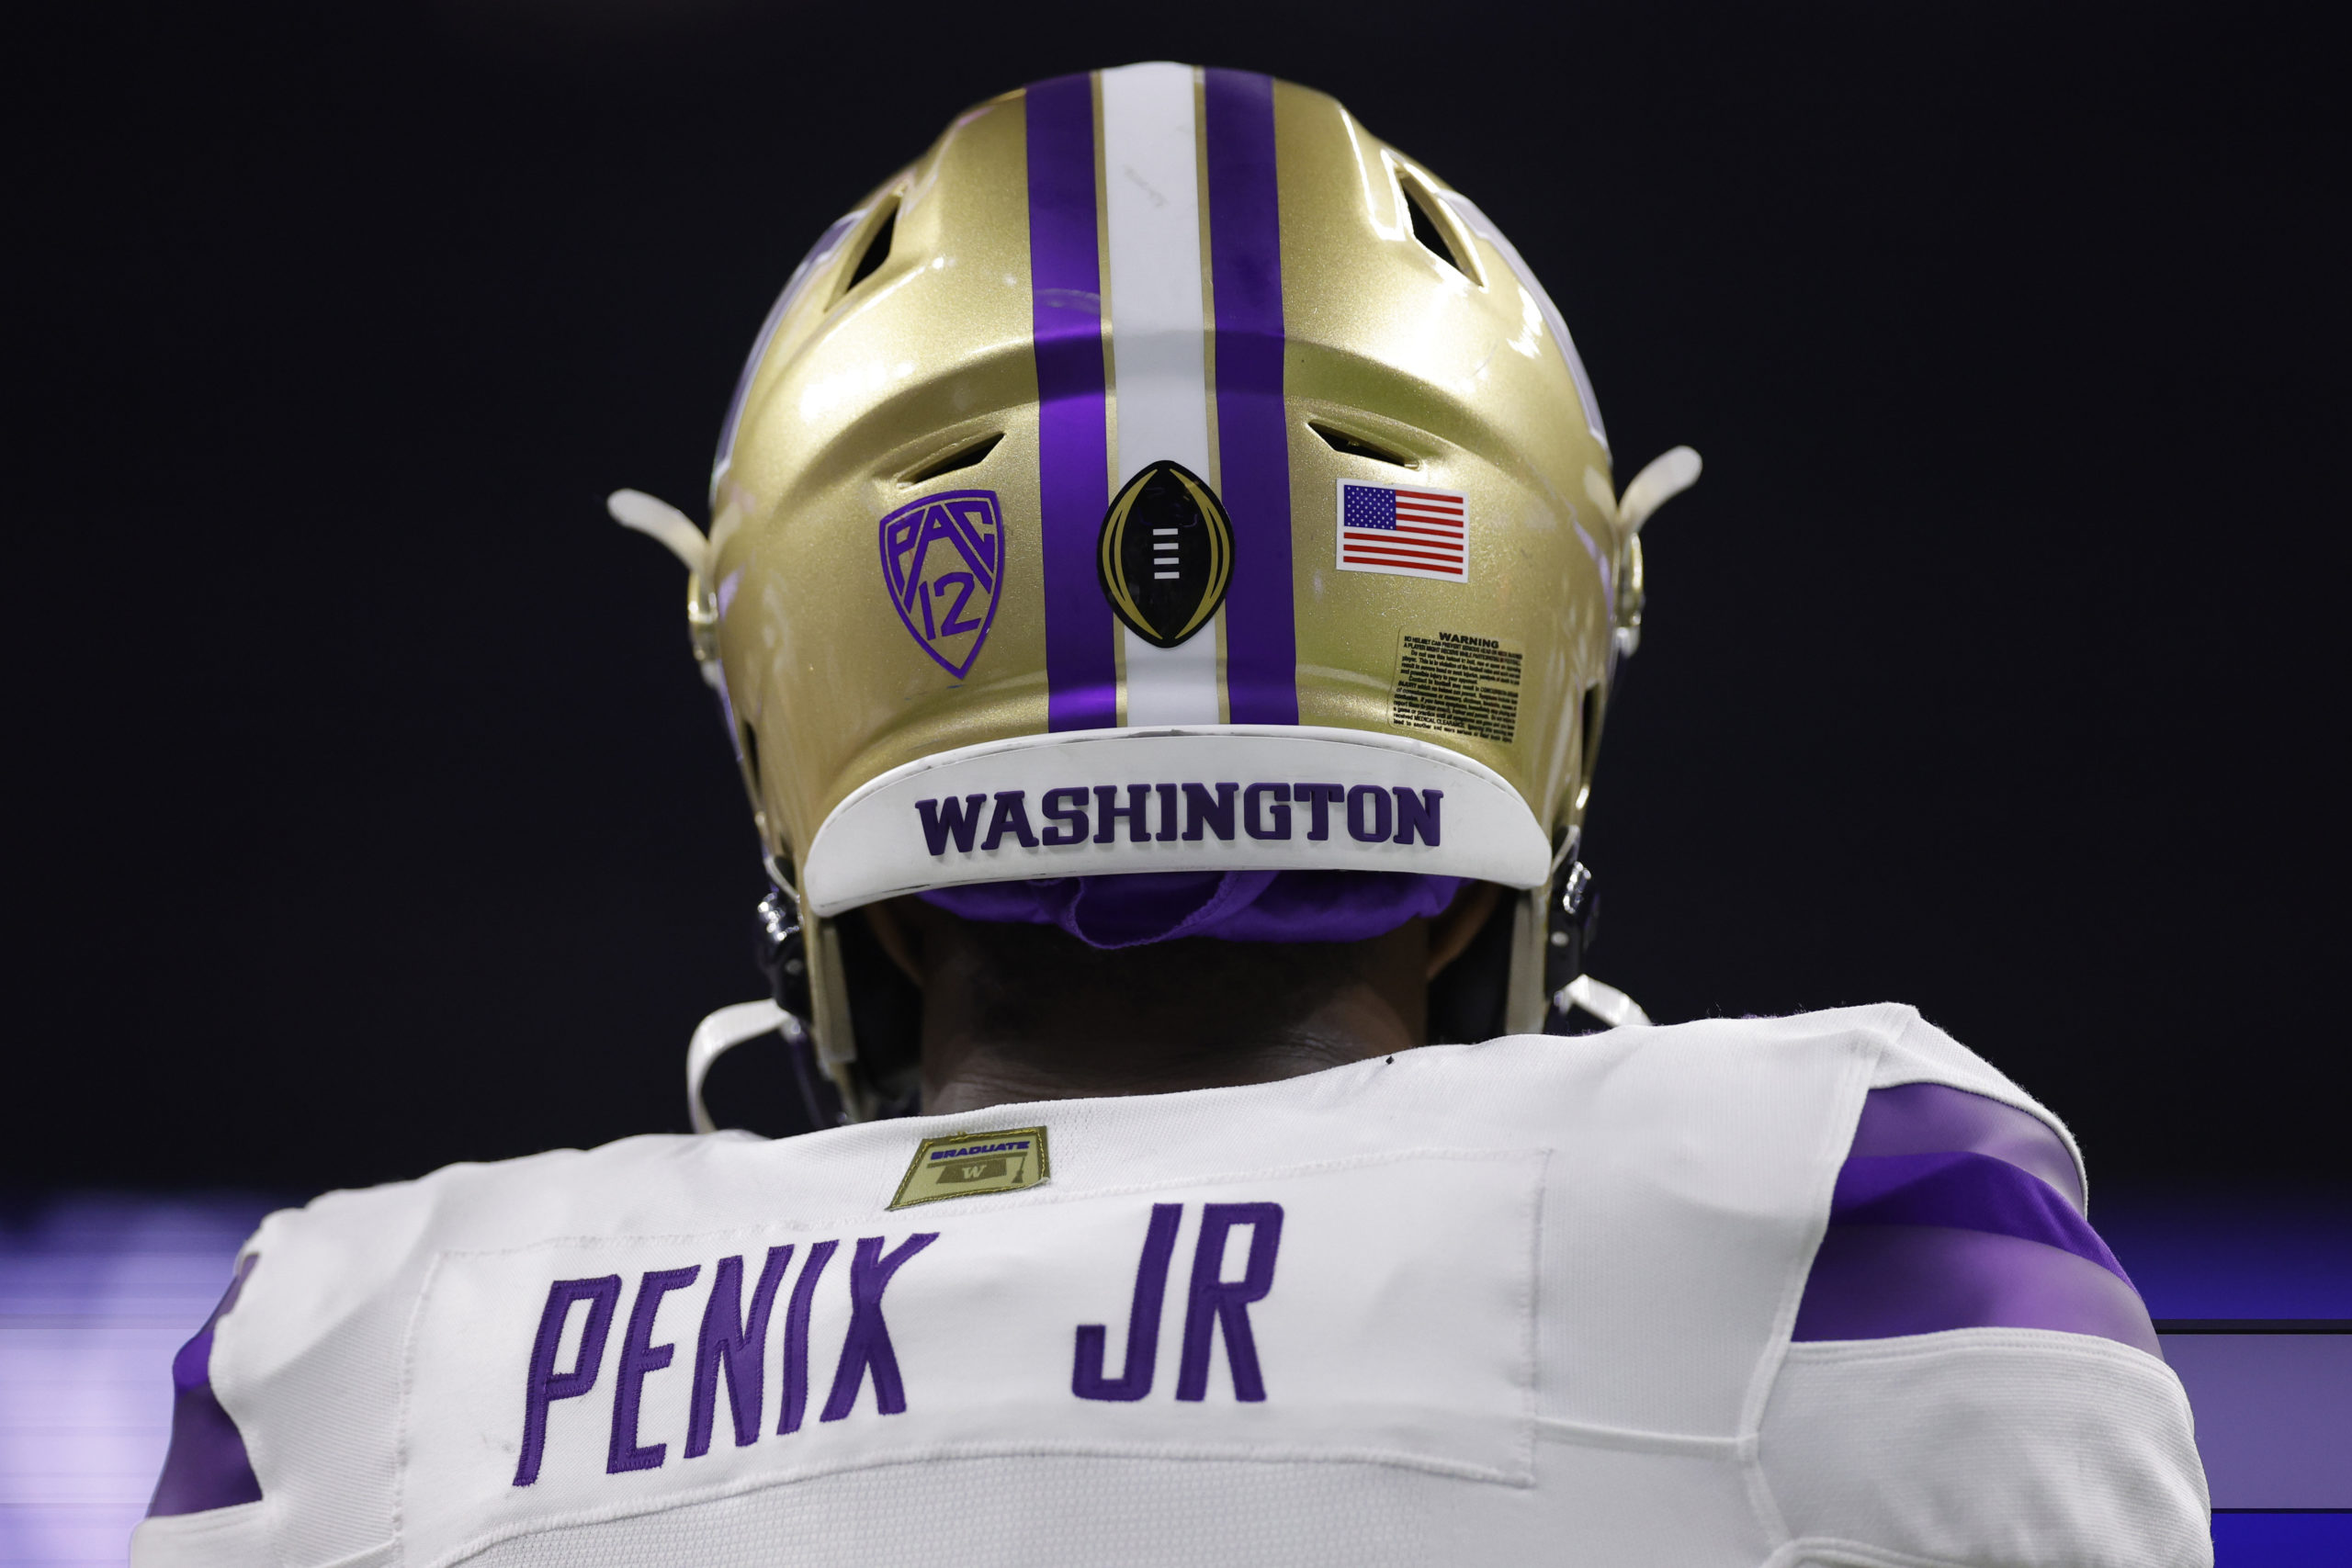 HOUSTON, TEXAS - JANUARY 08: A view of the back of Michael Penix Jr. #9 of the Washington Huskies in the third quarter against the Michigan Wolverines during the 2024 CFP National Championship game at NRG Stadium on January 08, 2024 in Houston, Texas. Carmen Mandato/Getty Images